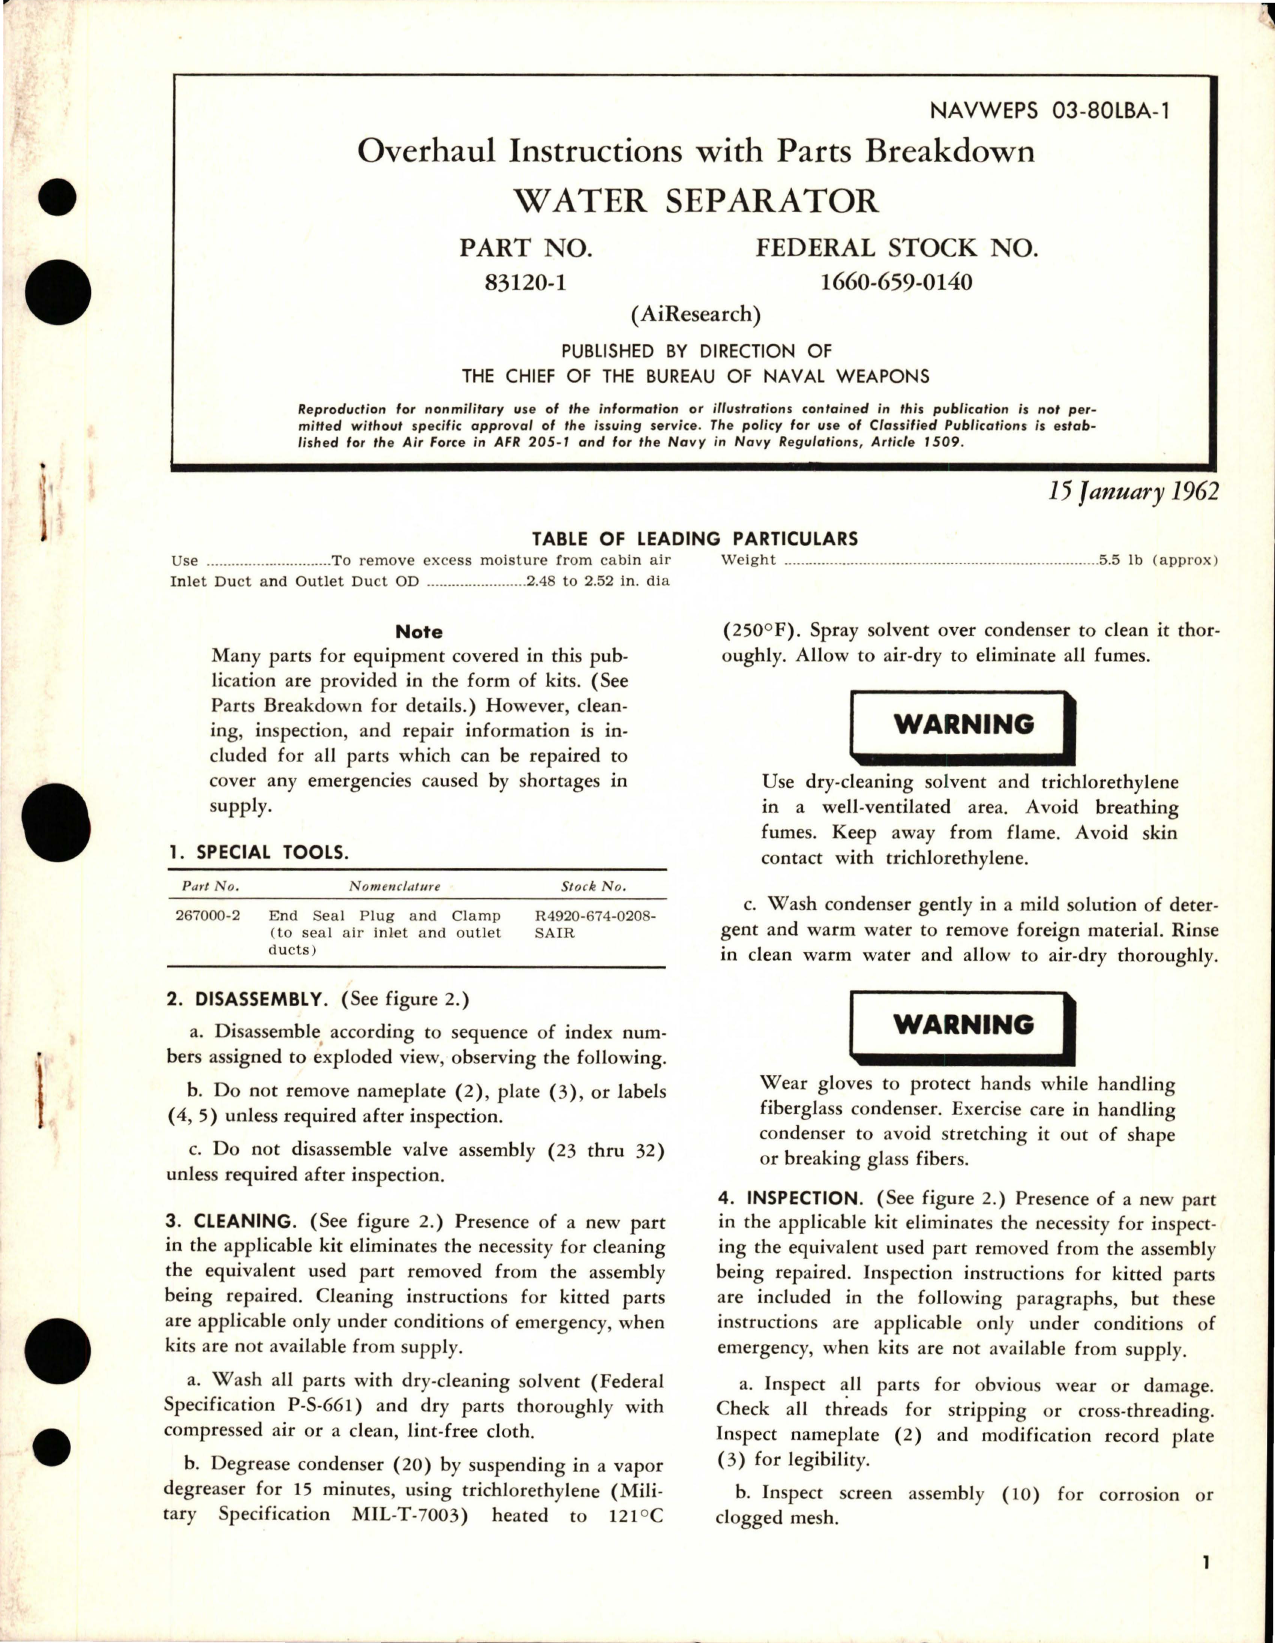 Sample page 1 from AirCorps Library document: Overhaul Instructions with Parts Breakdown for Water Separator - Part 83120-1